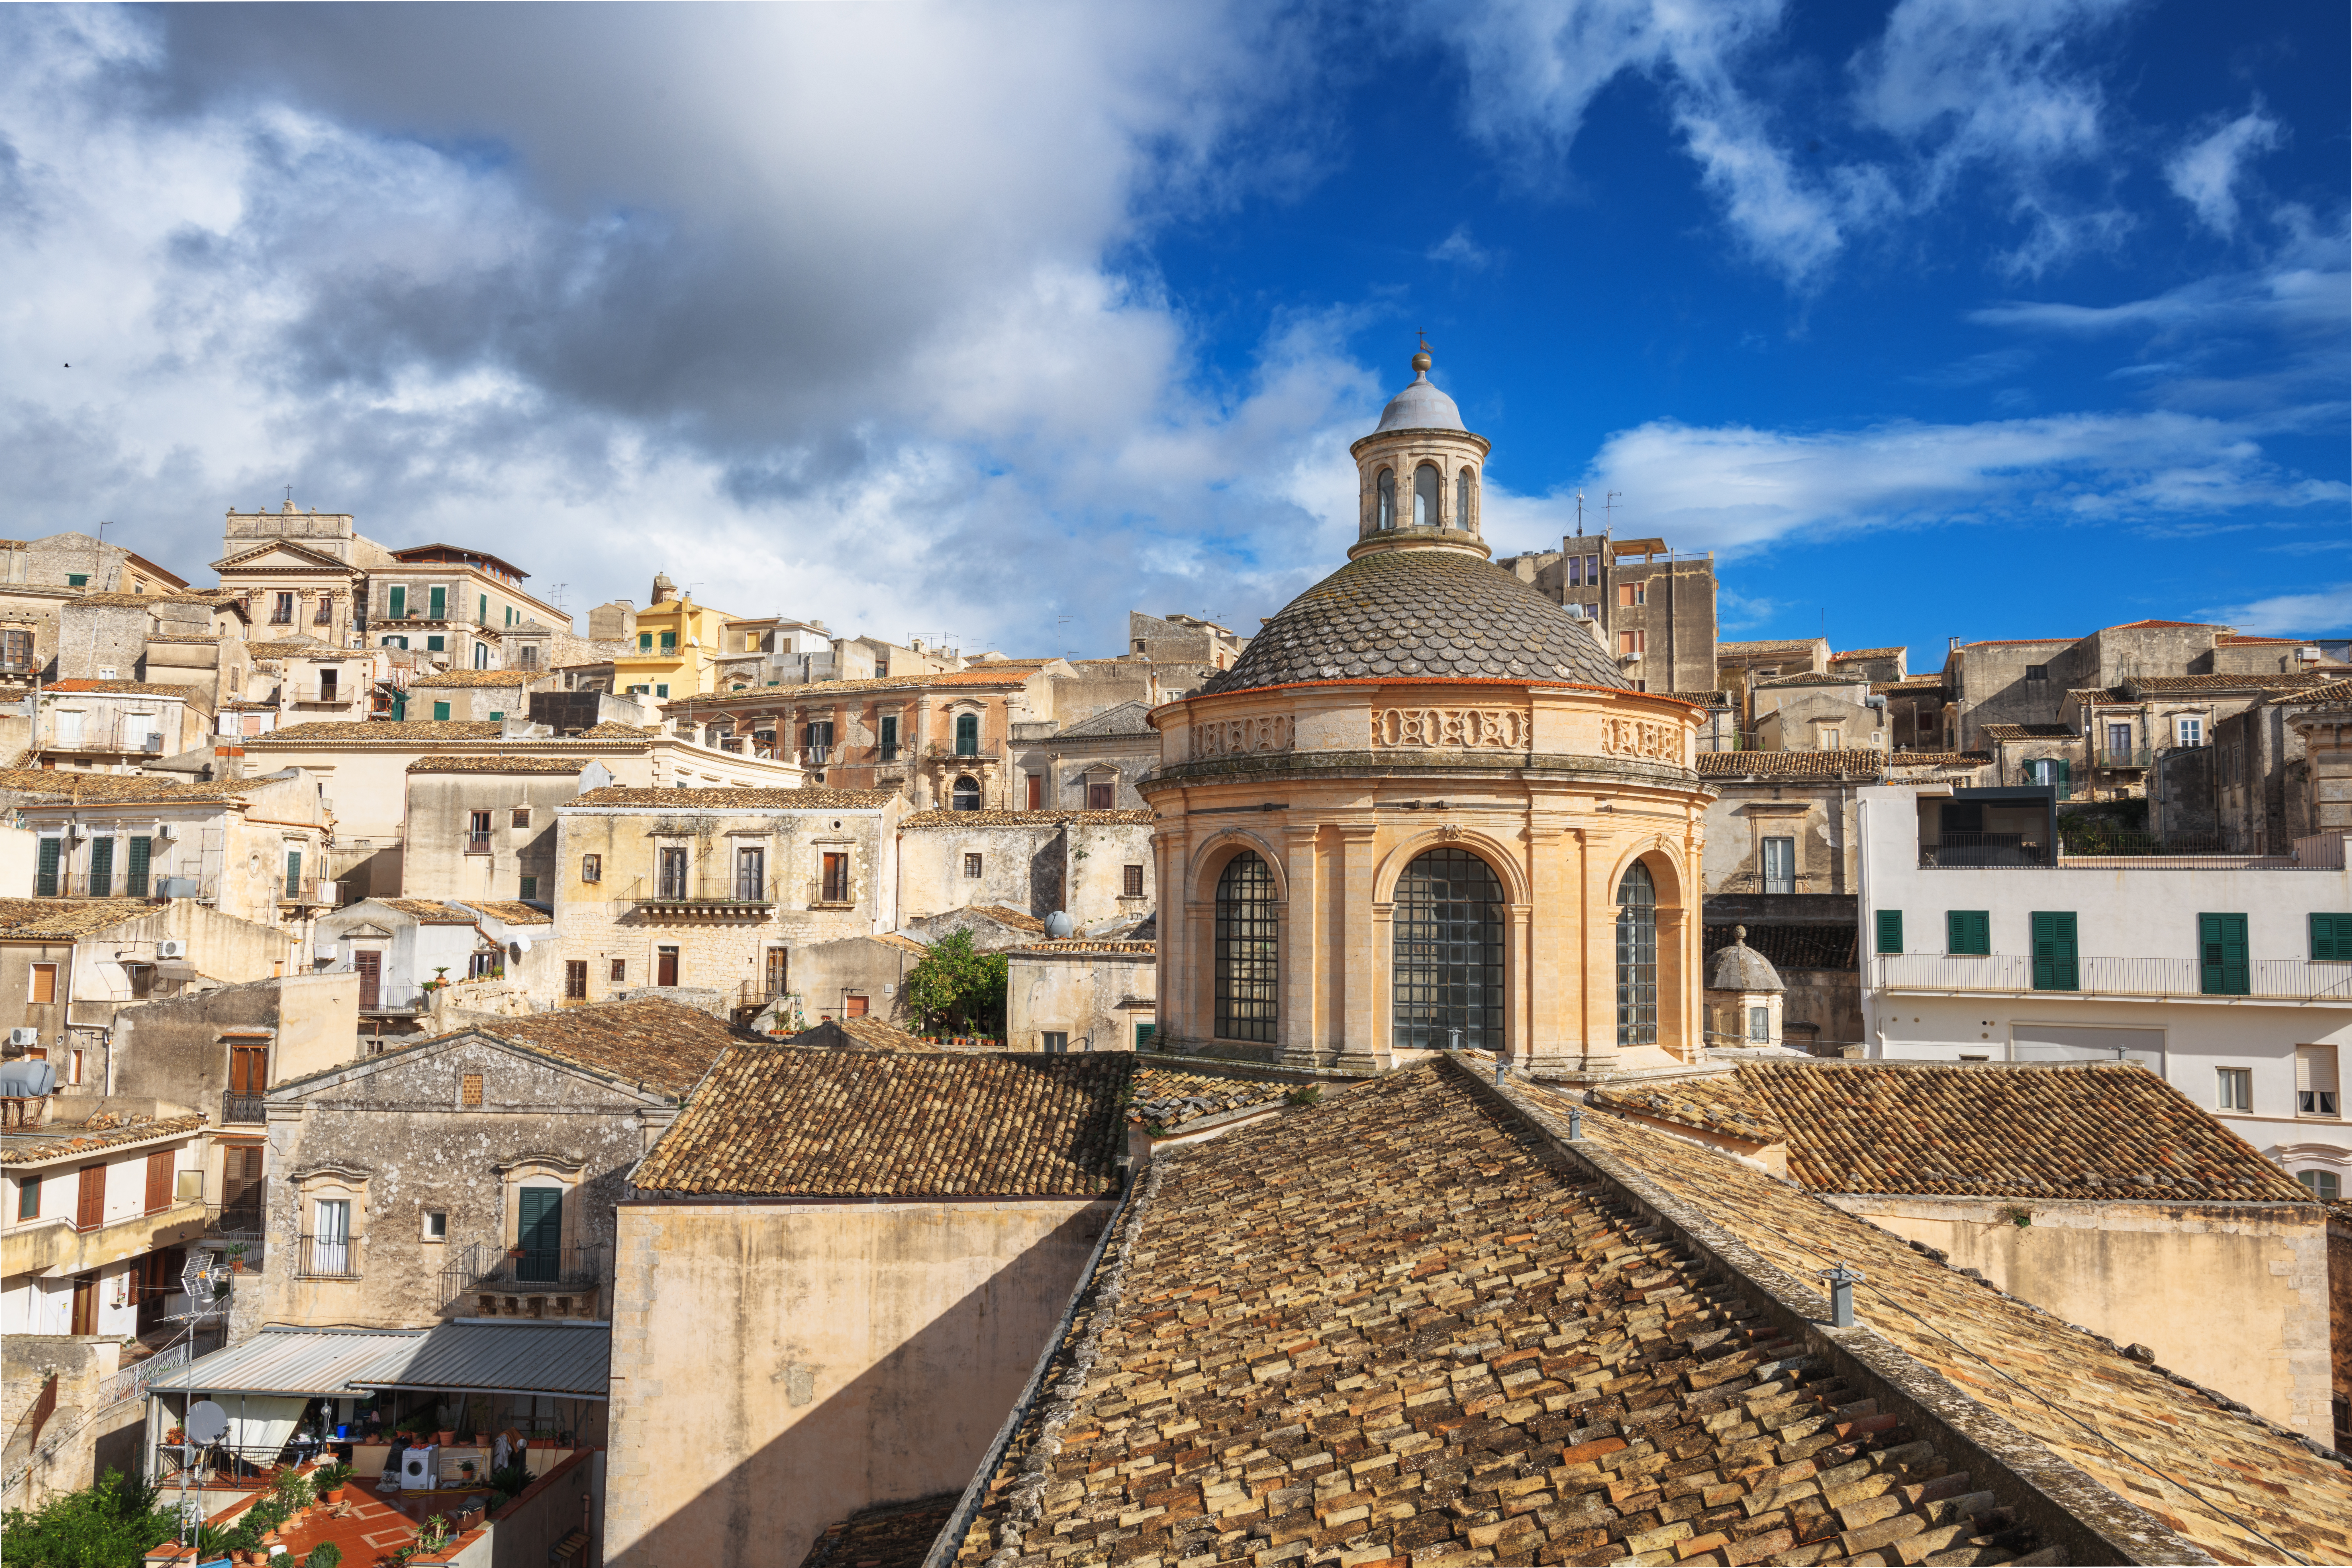 Modica, Sicily, Italy from the Cathedral of San Giorgio.